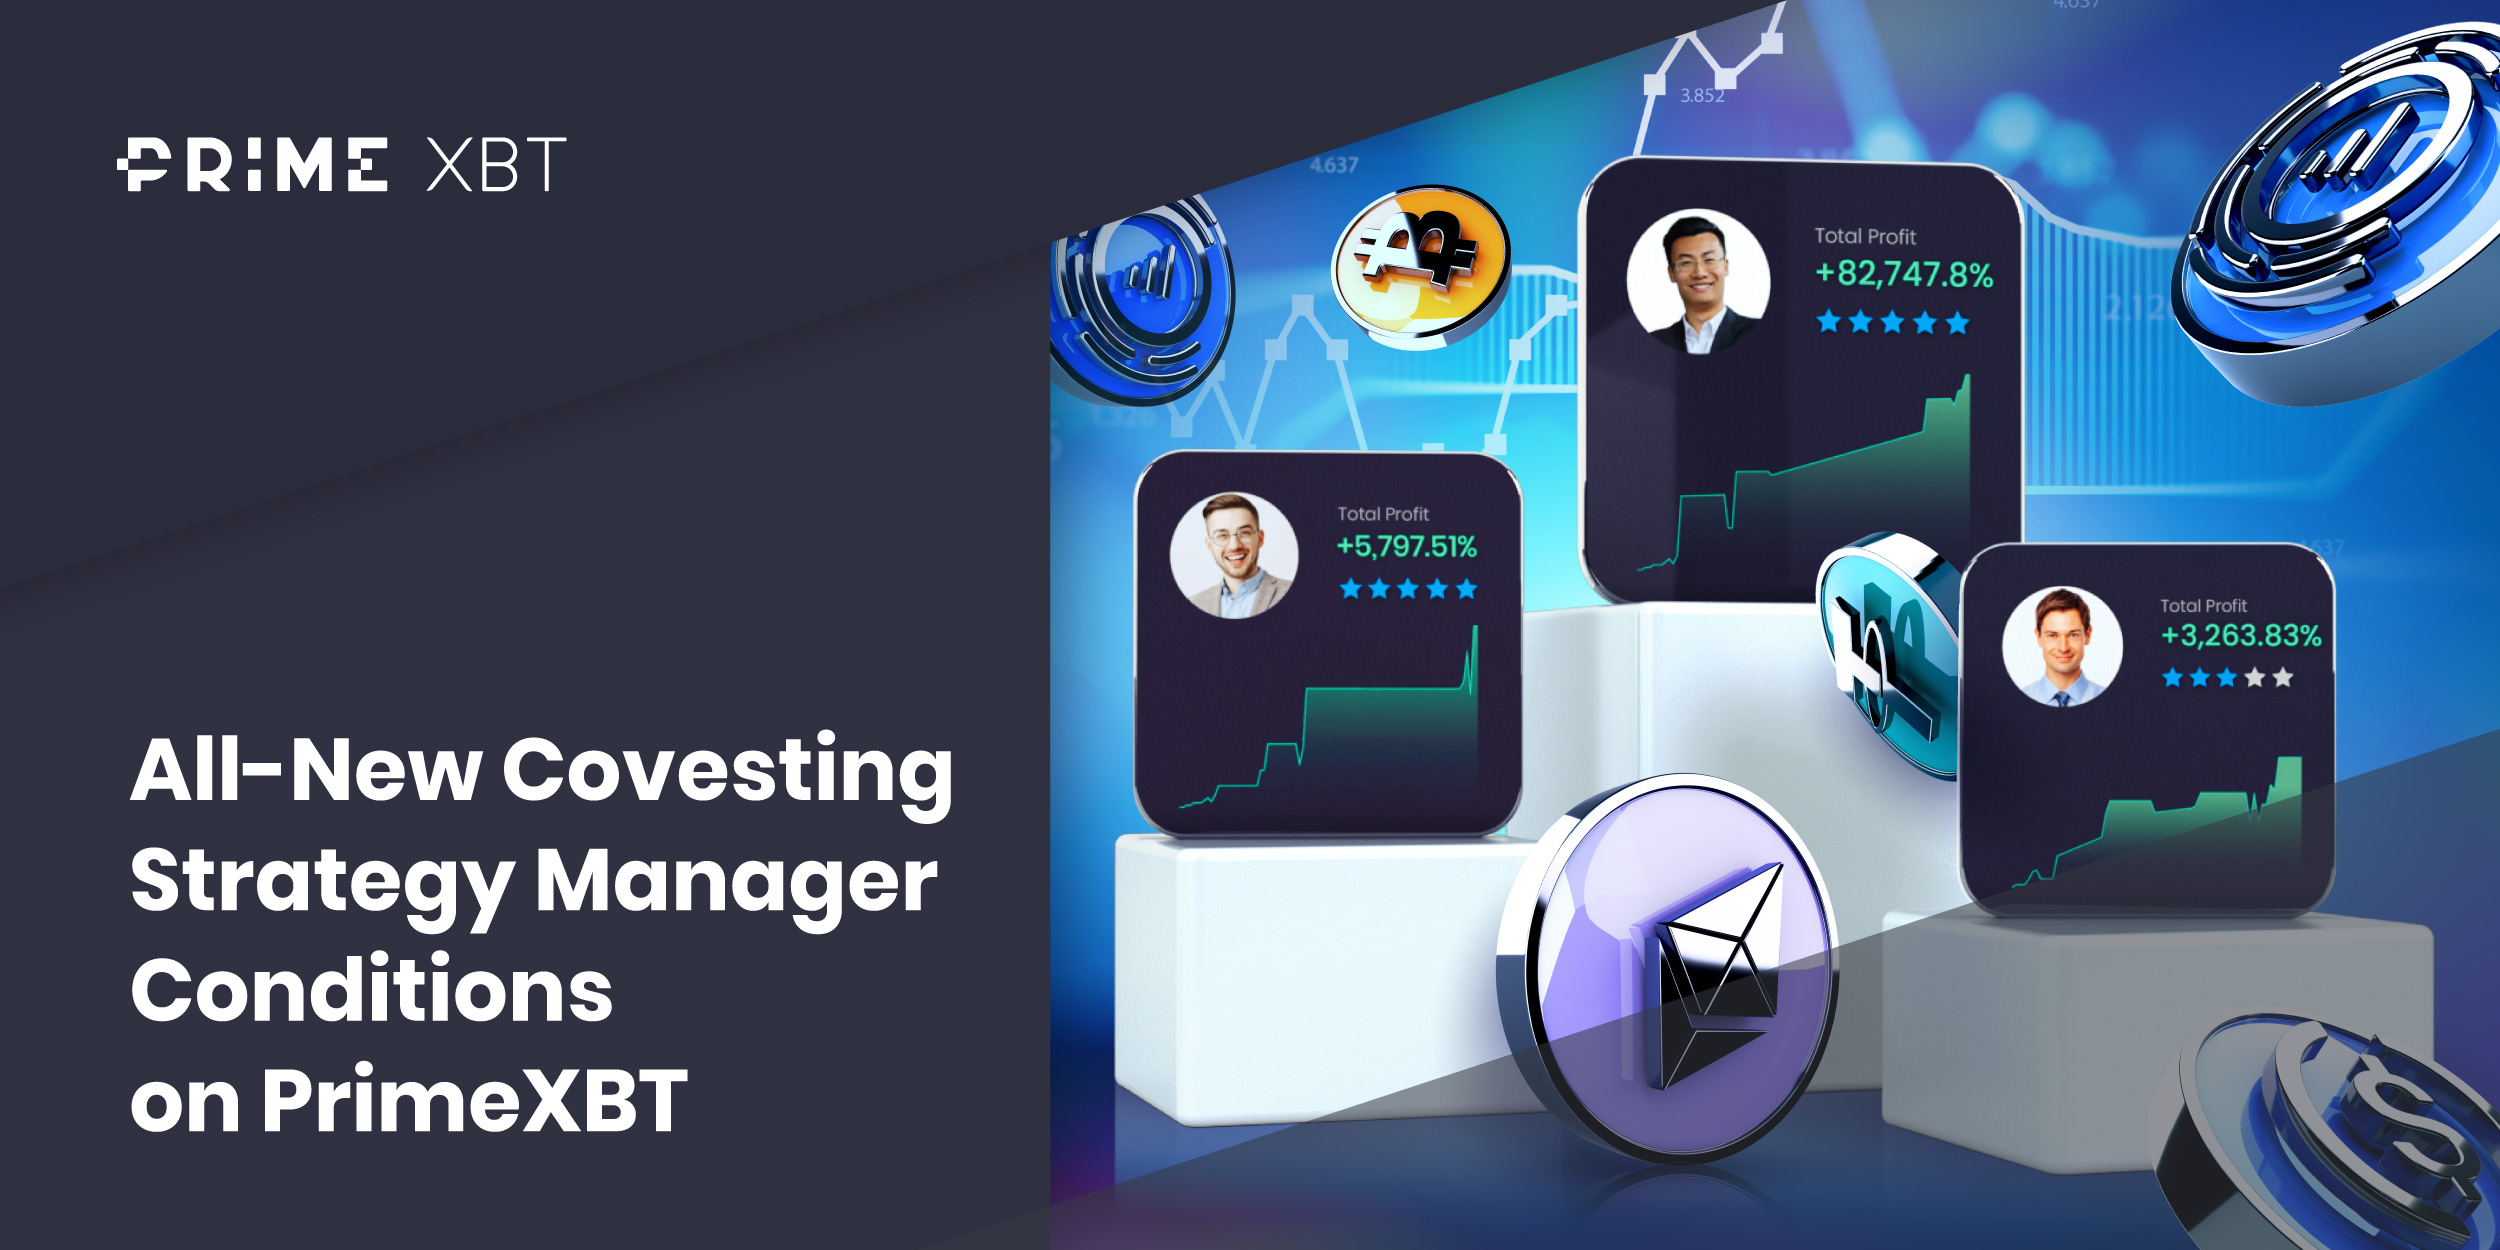 Check Out The All-New Covesting Strategy Manager Conditions At PrimeXBT - blog 31 10